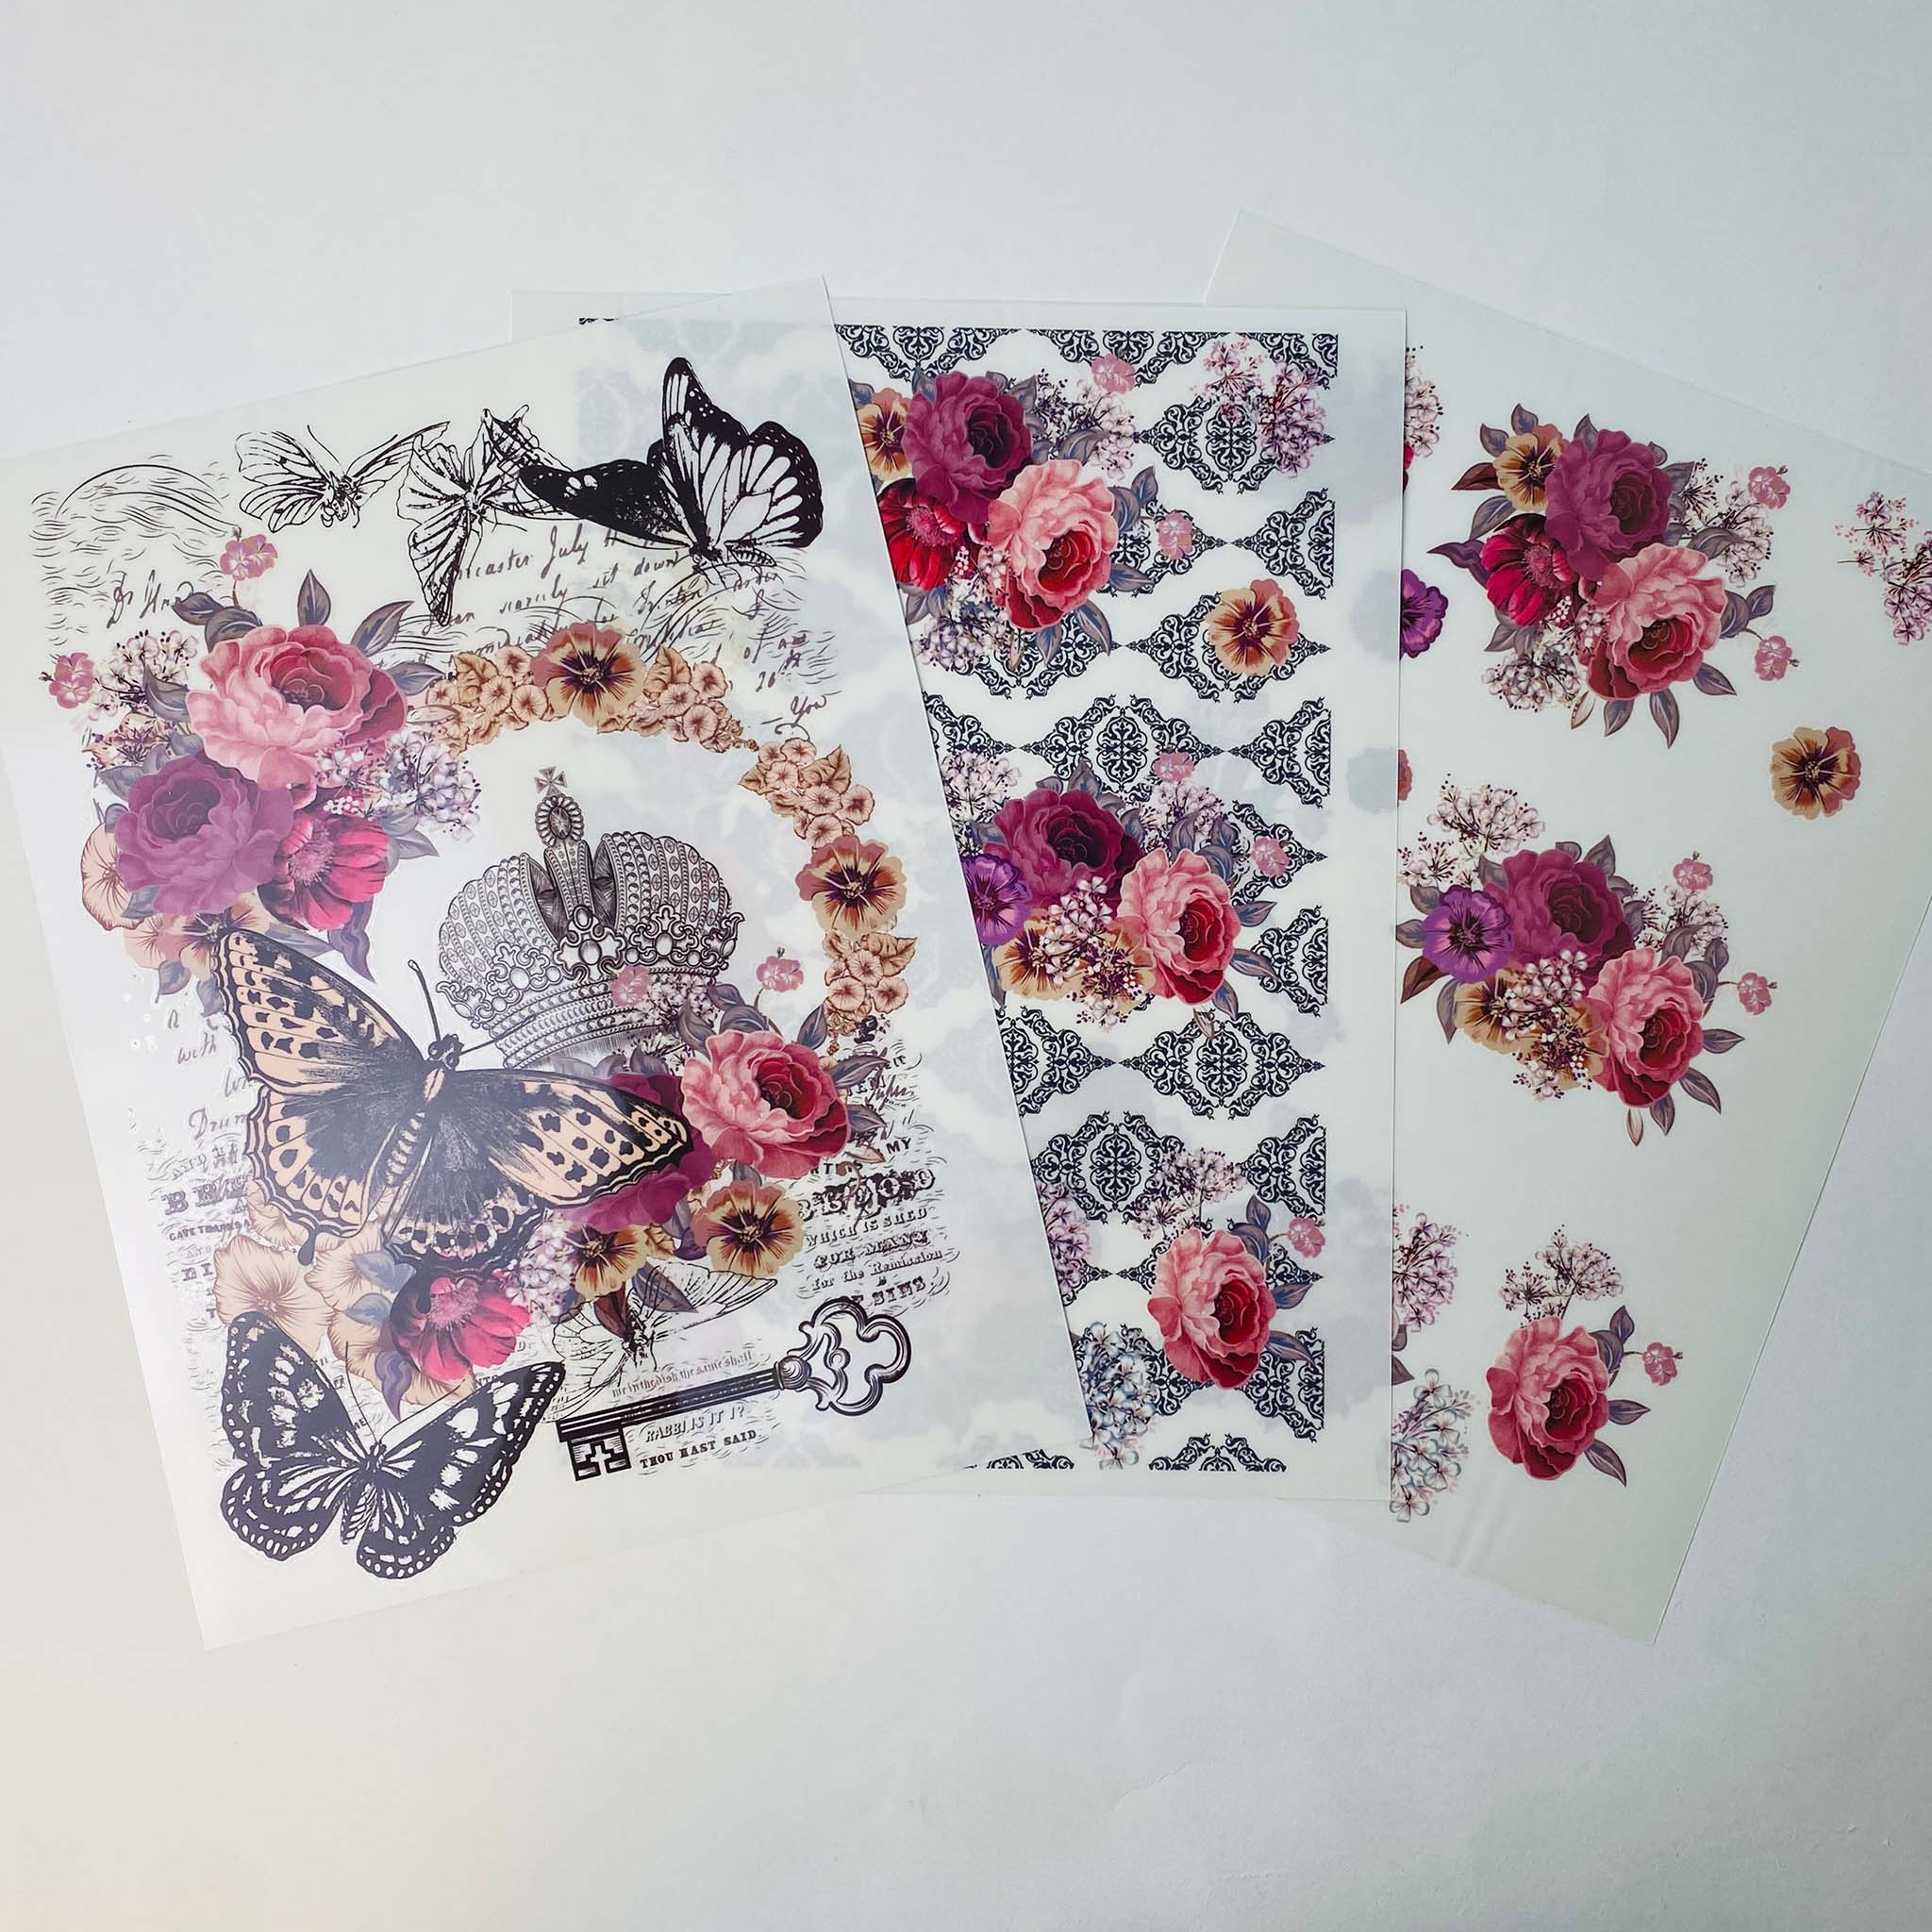 Three sheets of rub-on transfers that feature an ornate crown, romantic roses and fluttering butterflies; small bouquets of mauve and purple flowers; and a repeating black damask pattern with small bouquets of mauve and purple flowers.